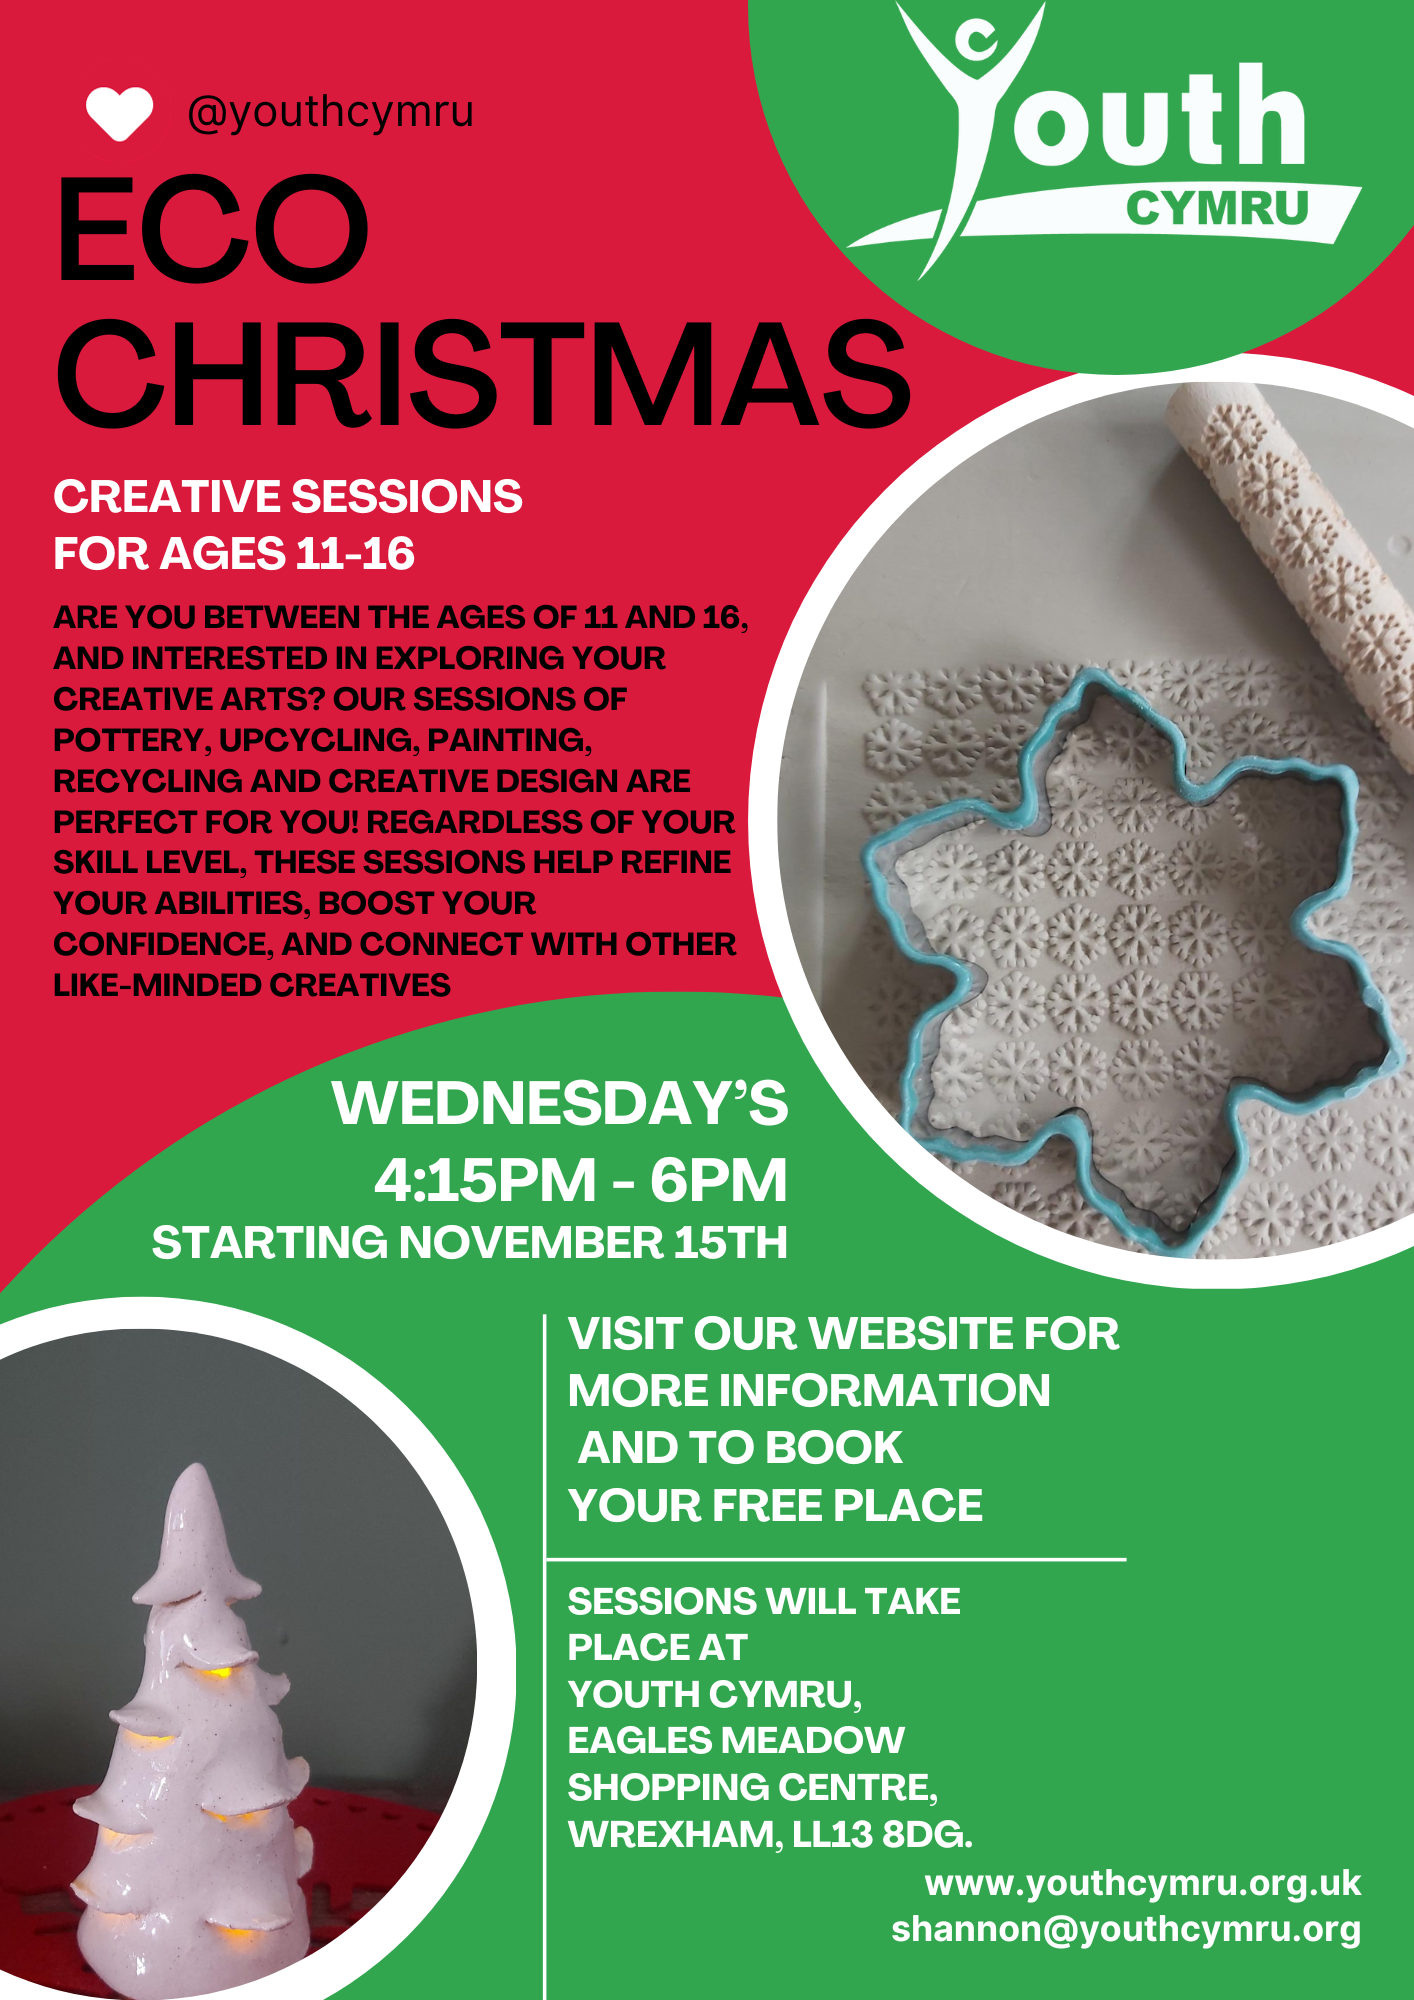 Are you between the ages of 11 and 16, and interested in exploring your creative arts? Our sessions of pottery, upcycling, painting, recycling and creative design are perfect for you! Regardless of your skill level, these sessions help refine your abilities, boost your confidence, and connect with other like-minded creatives